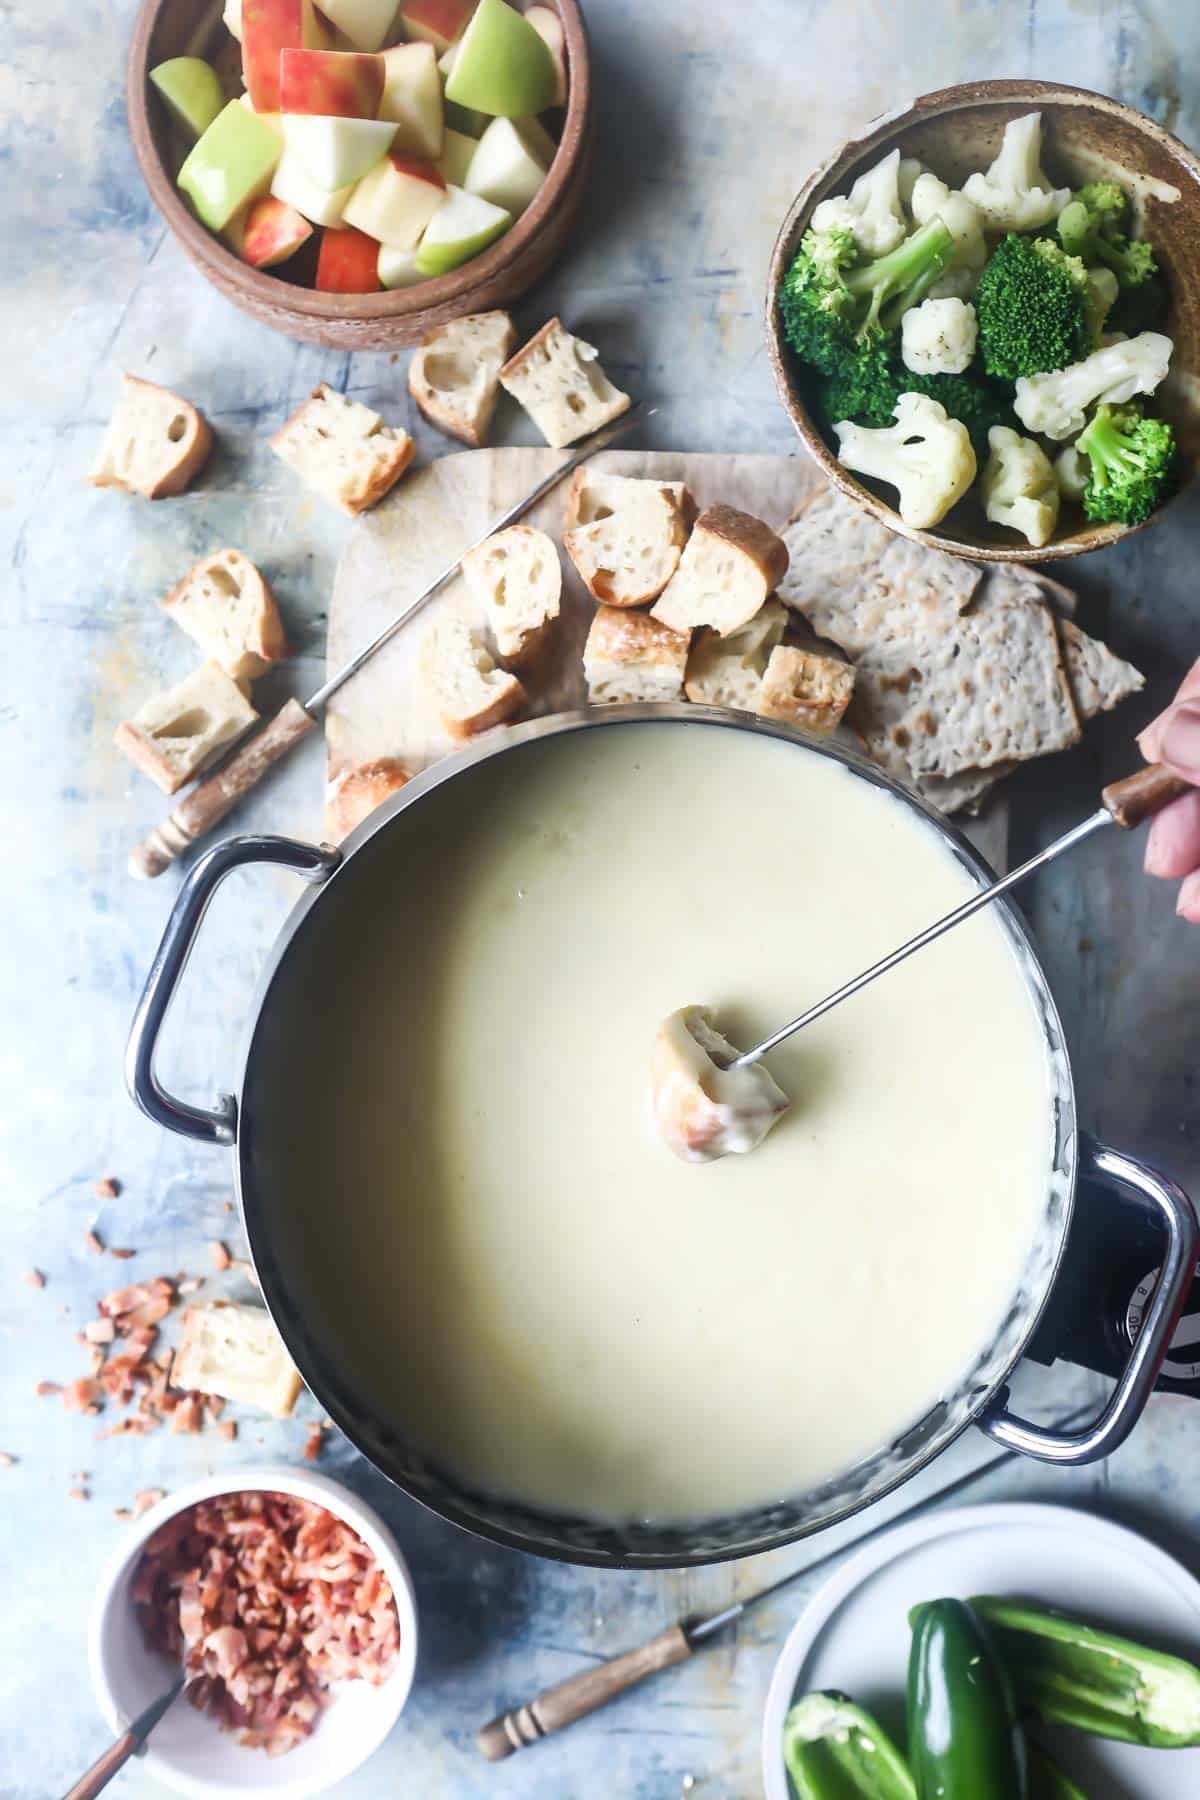 A pot of cheese fondue surrounded by bread and vegetables for dipping.